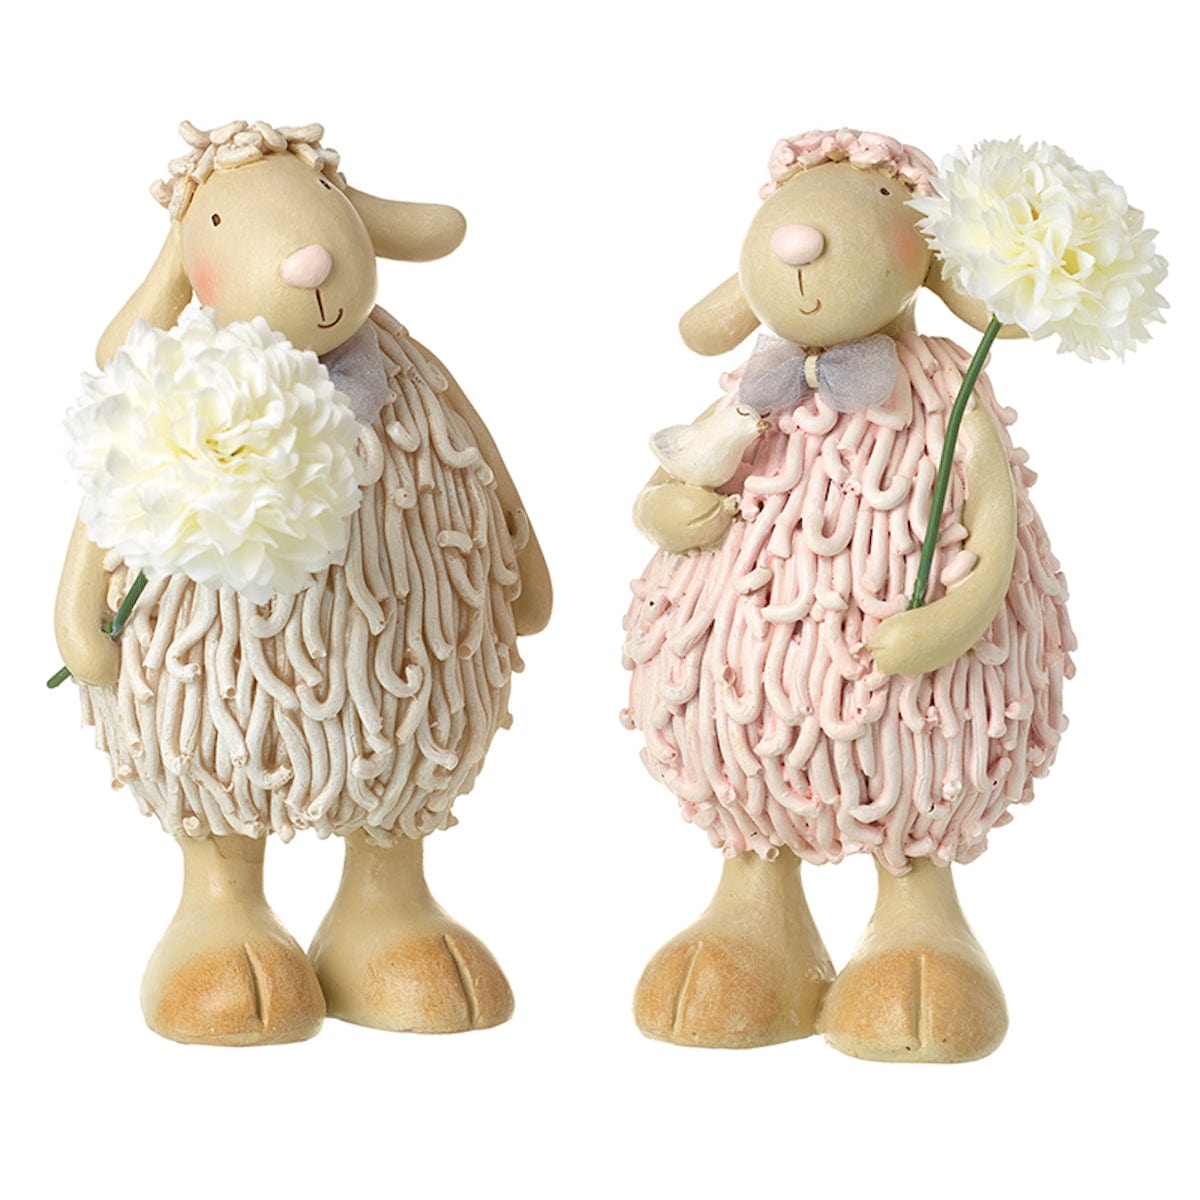 Heaven Sends Easter Decorations Set of 2 Resin Sheep with Flowers Easter Decorations